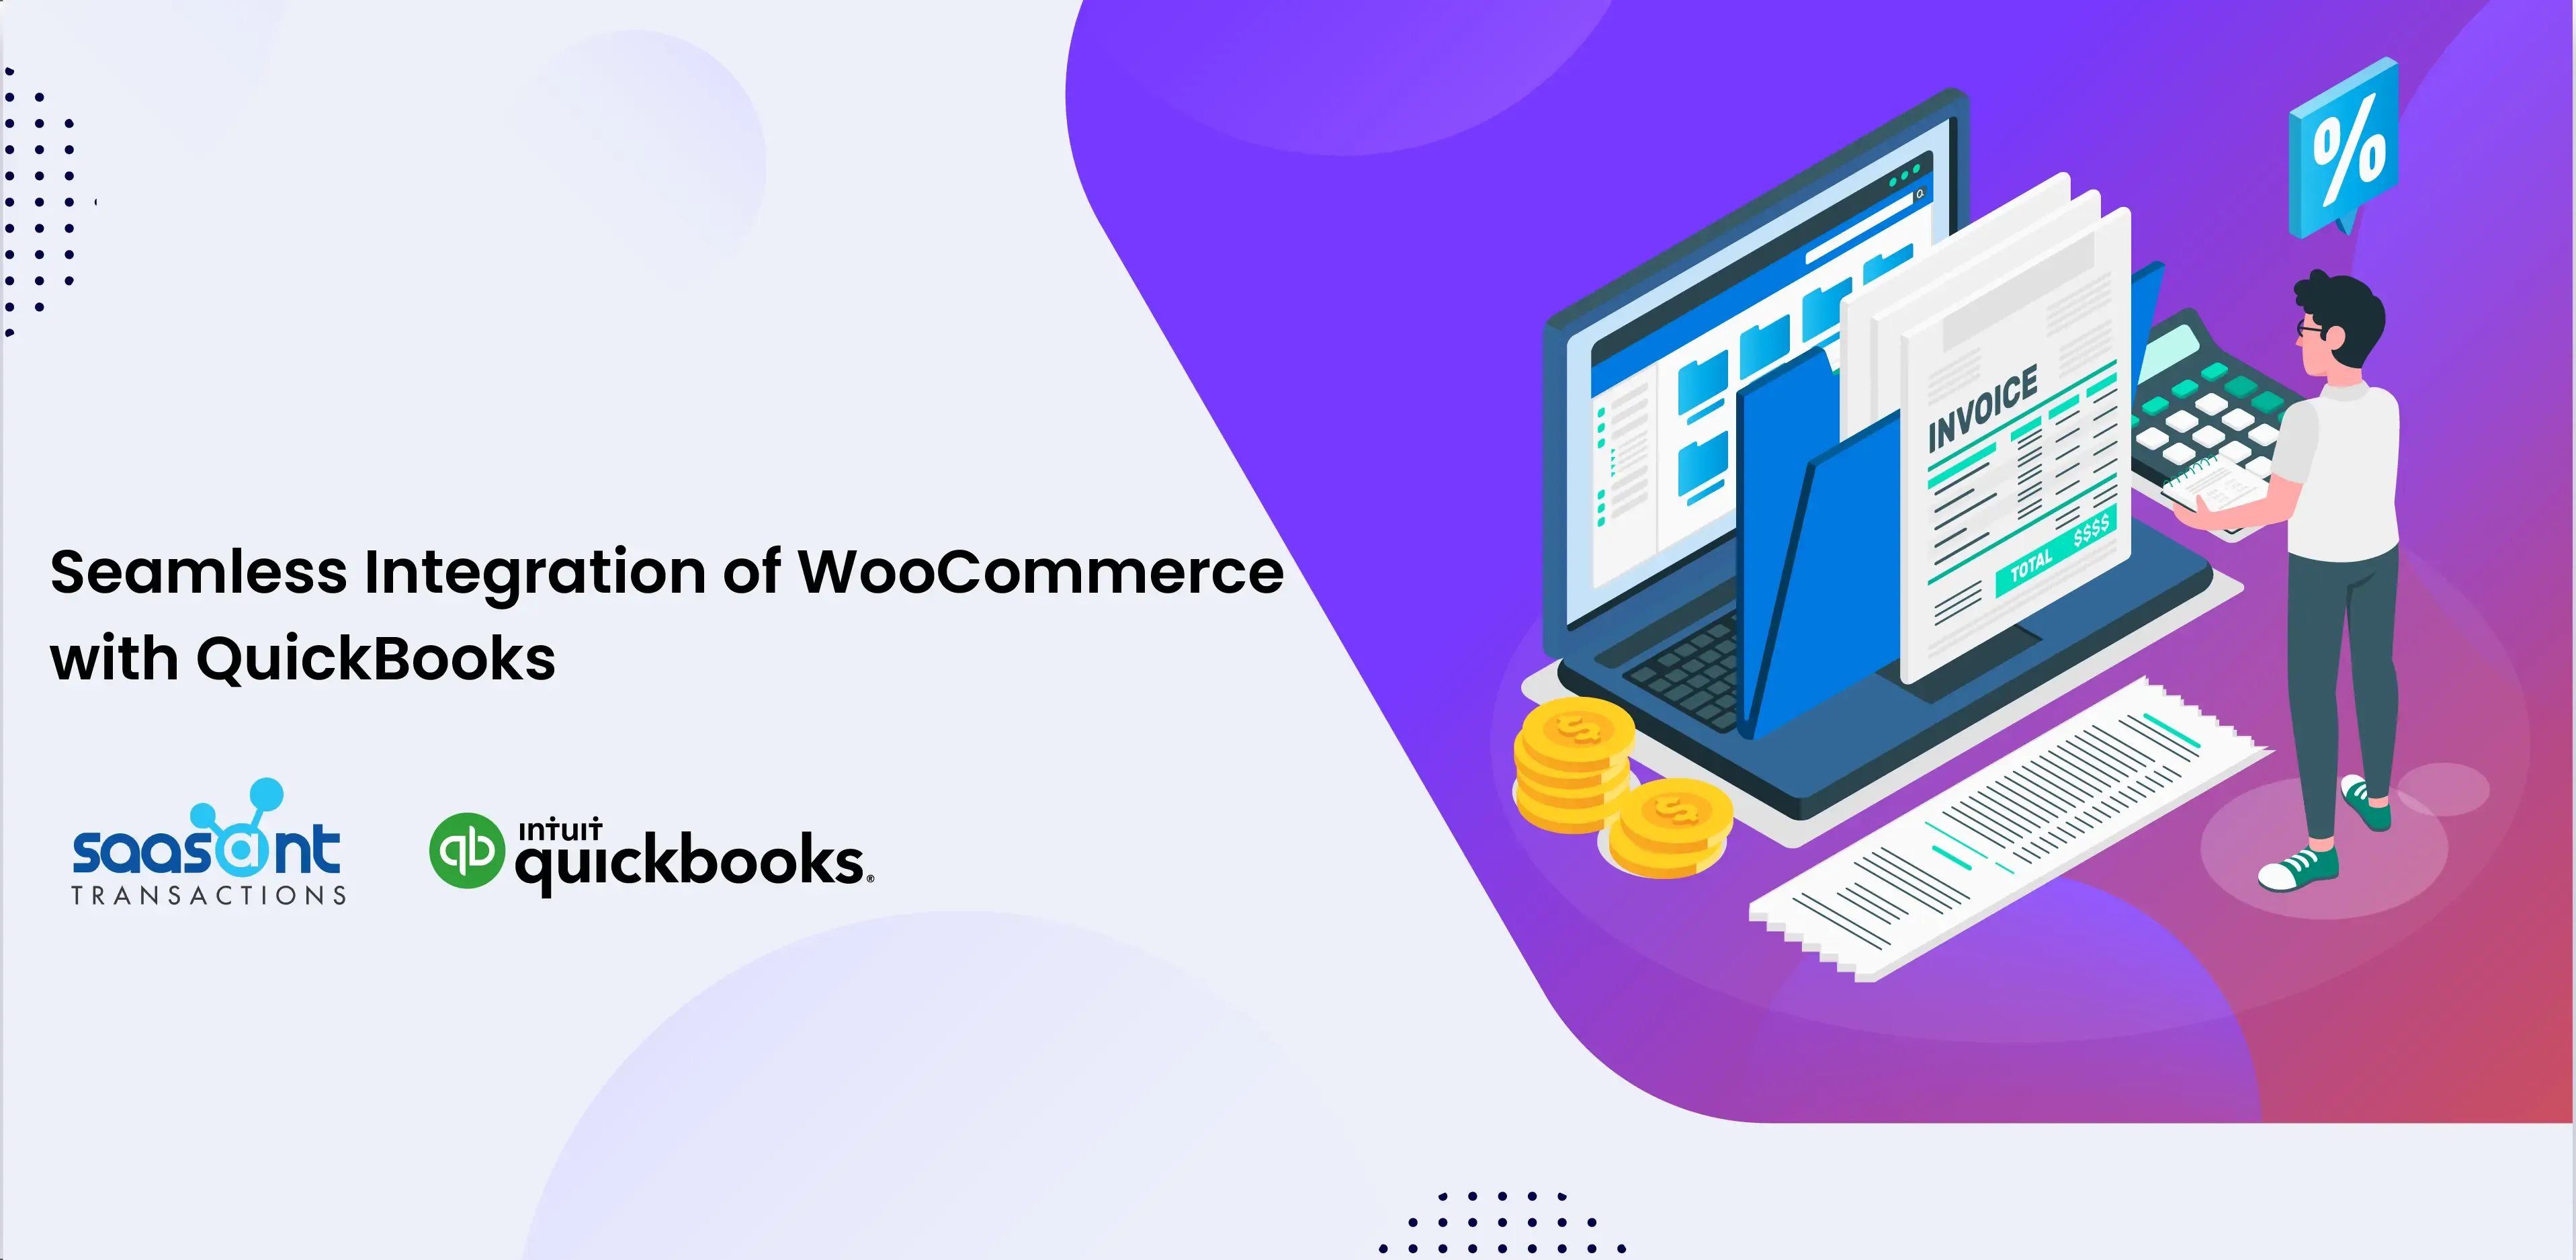 Seamless-Integration-of-WooCommerce-with-QuickBooks.webp